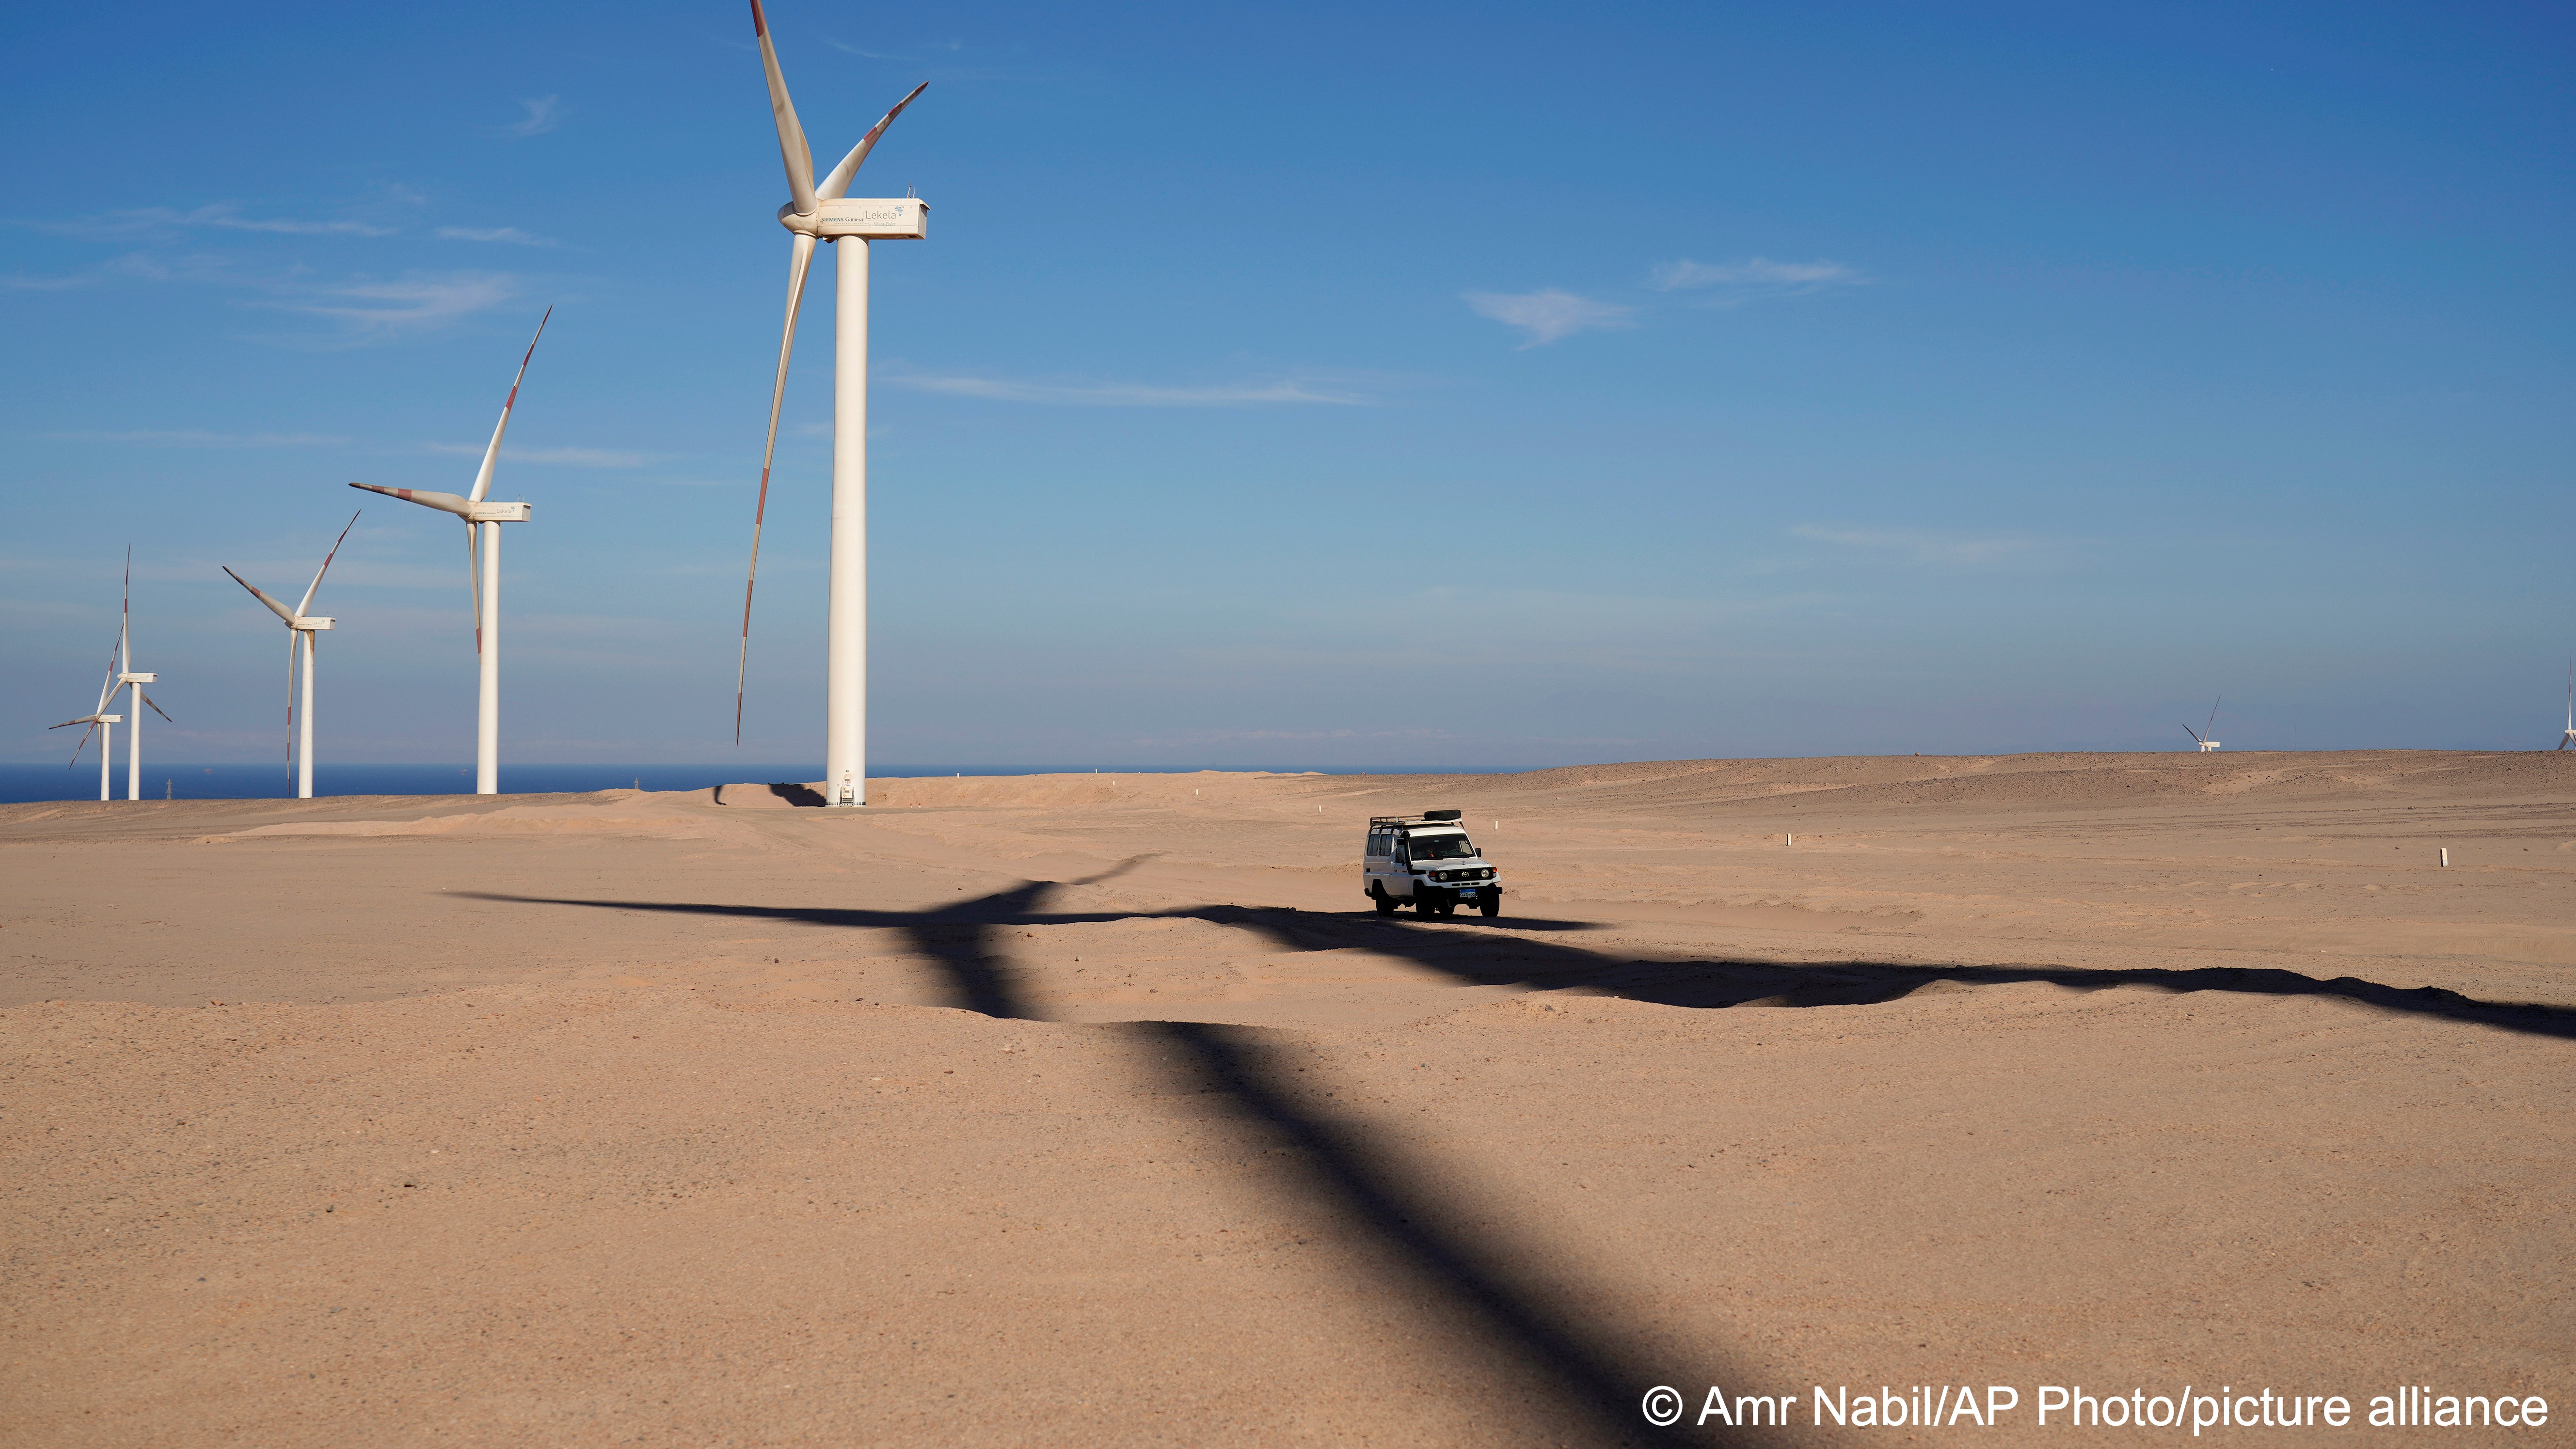 A vehicle drives near wind turbines at Lekela wind power station, near the Red Sea city of Ras Ghareb, some 300 km from Cairo, Egypt, 12 October 2022 (photo: AP Photo/Amr Nabil)